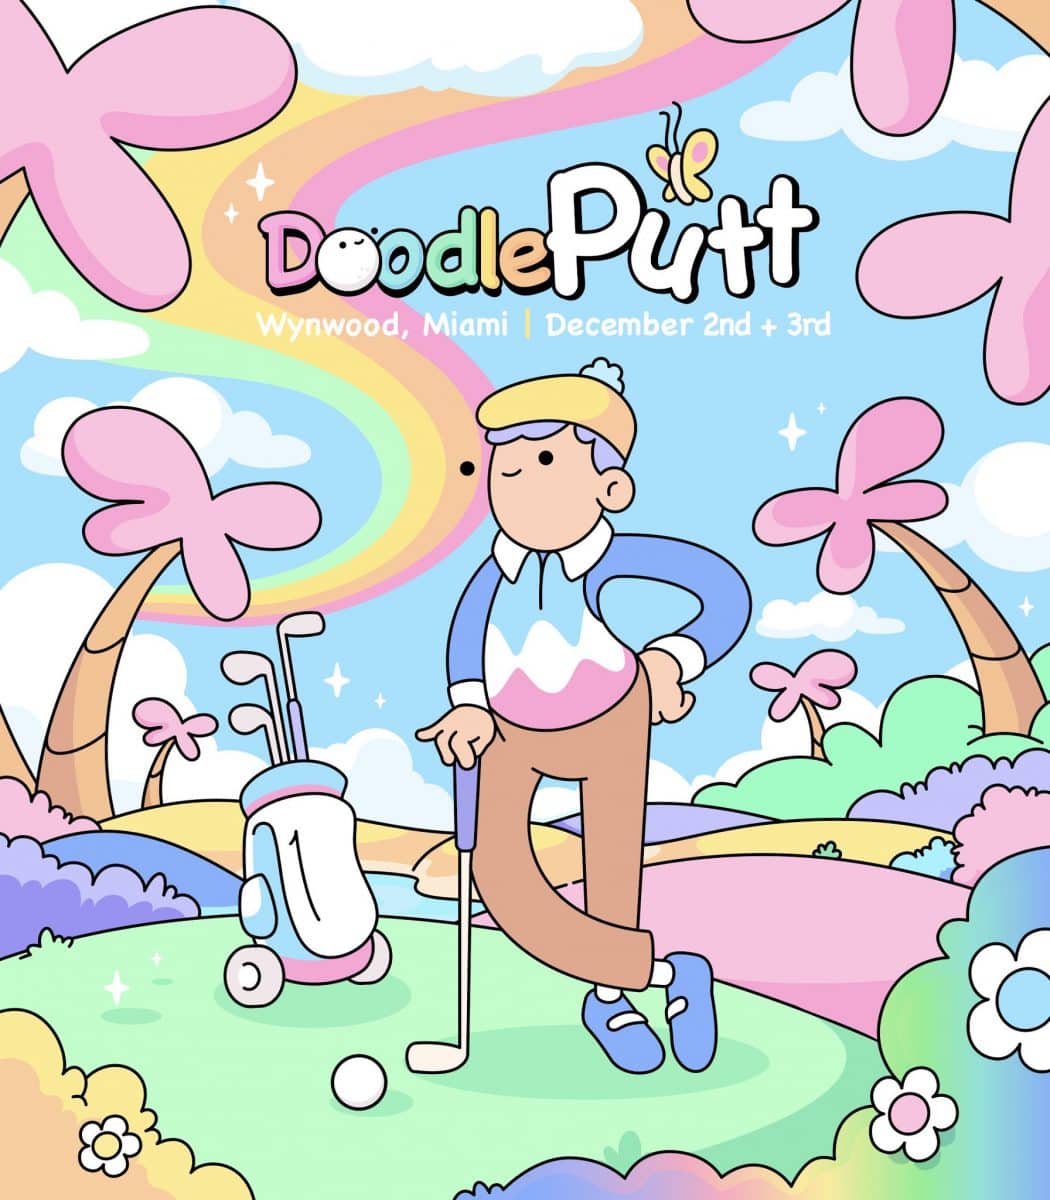 Image of the Doodles Golf event poster showing a character on a golf course